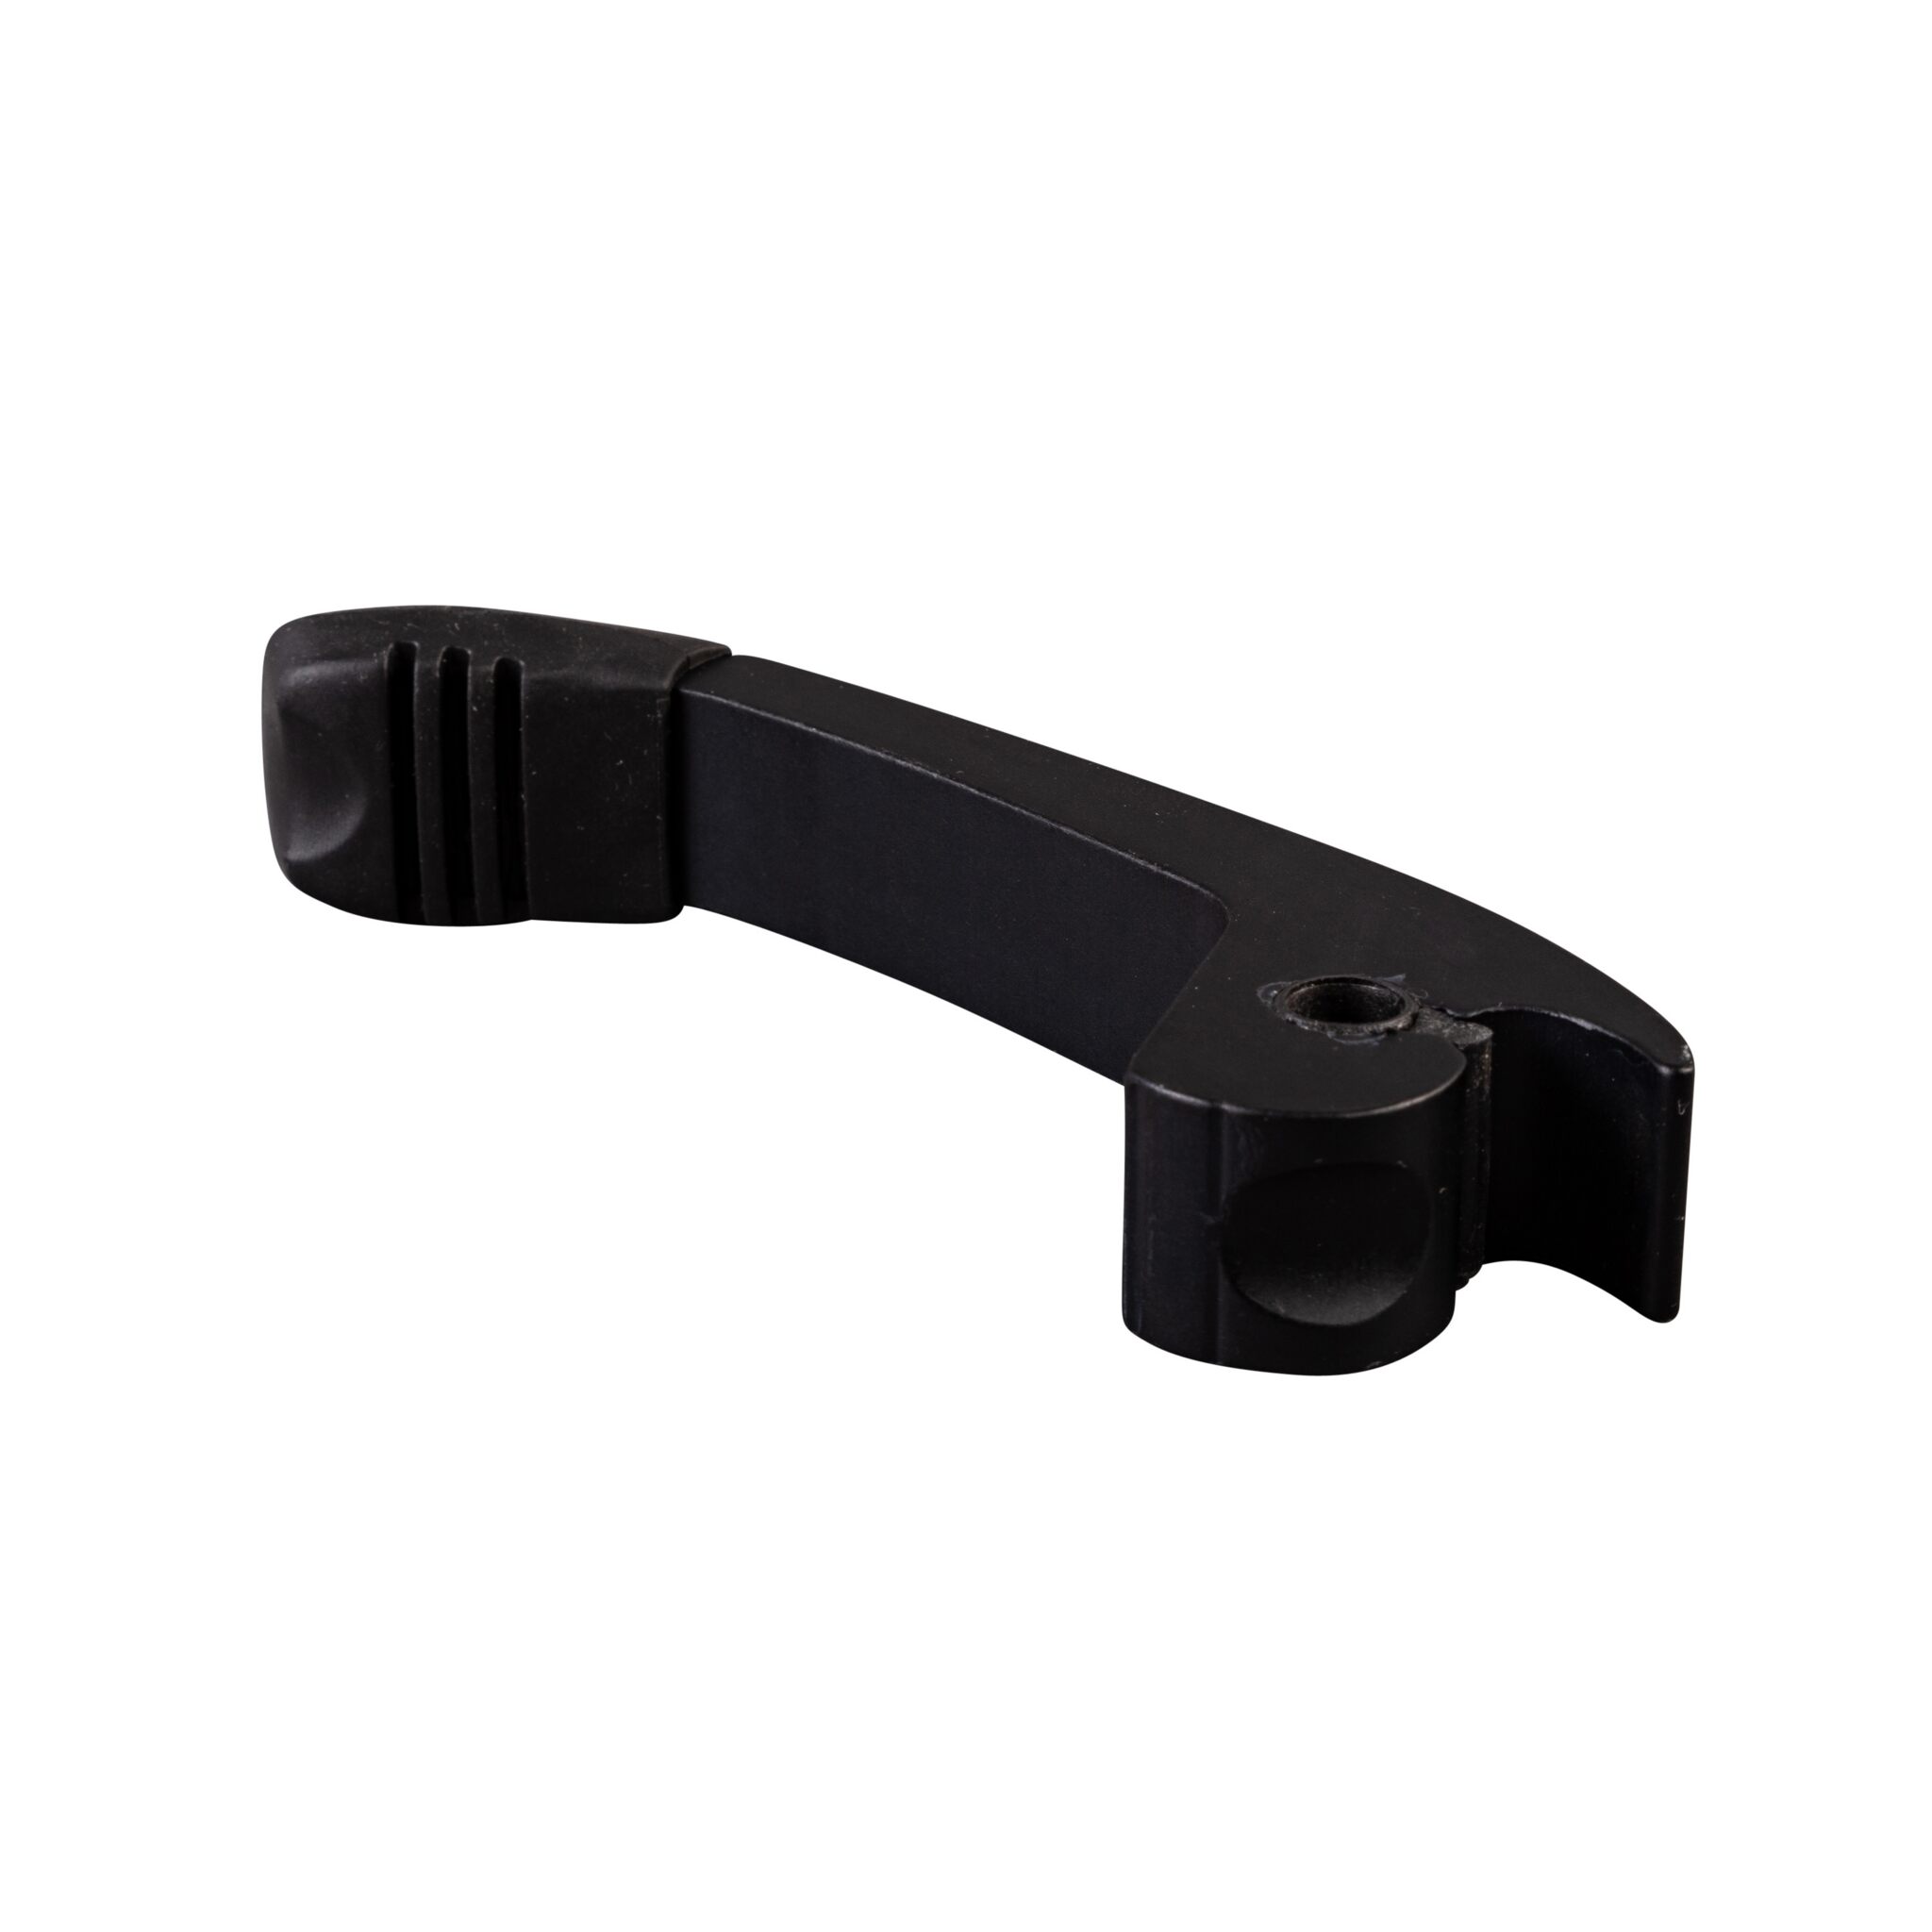 Spinlock replacement lever for XTS trap stopper